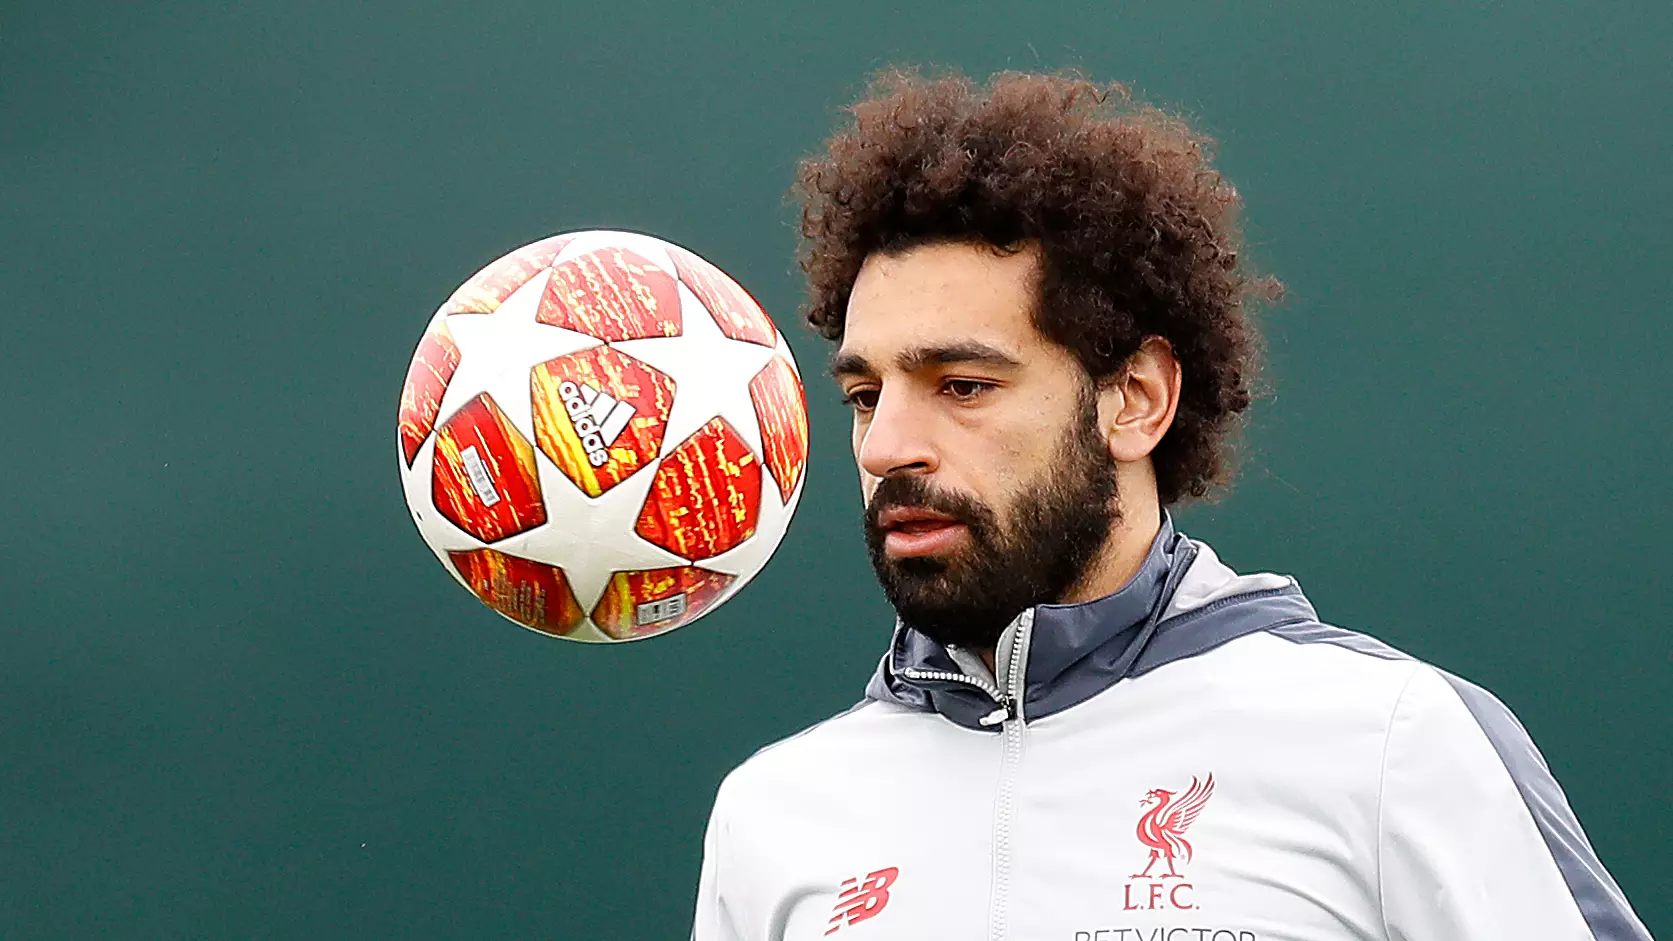 Liverpool Issue Statement Condemning 'Disturbing' And 'Dangerous' Abuse Of Mohamed Salah